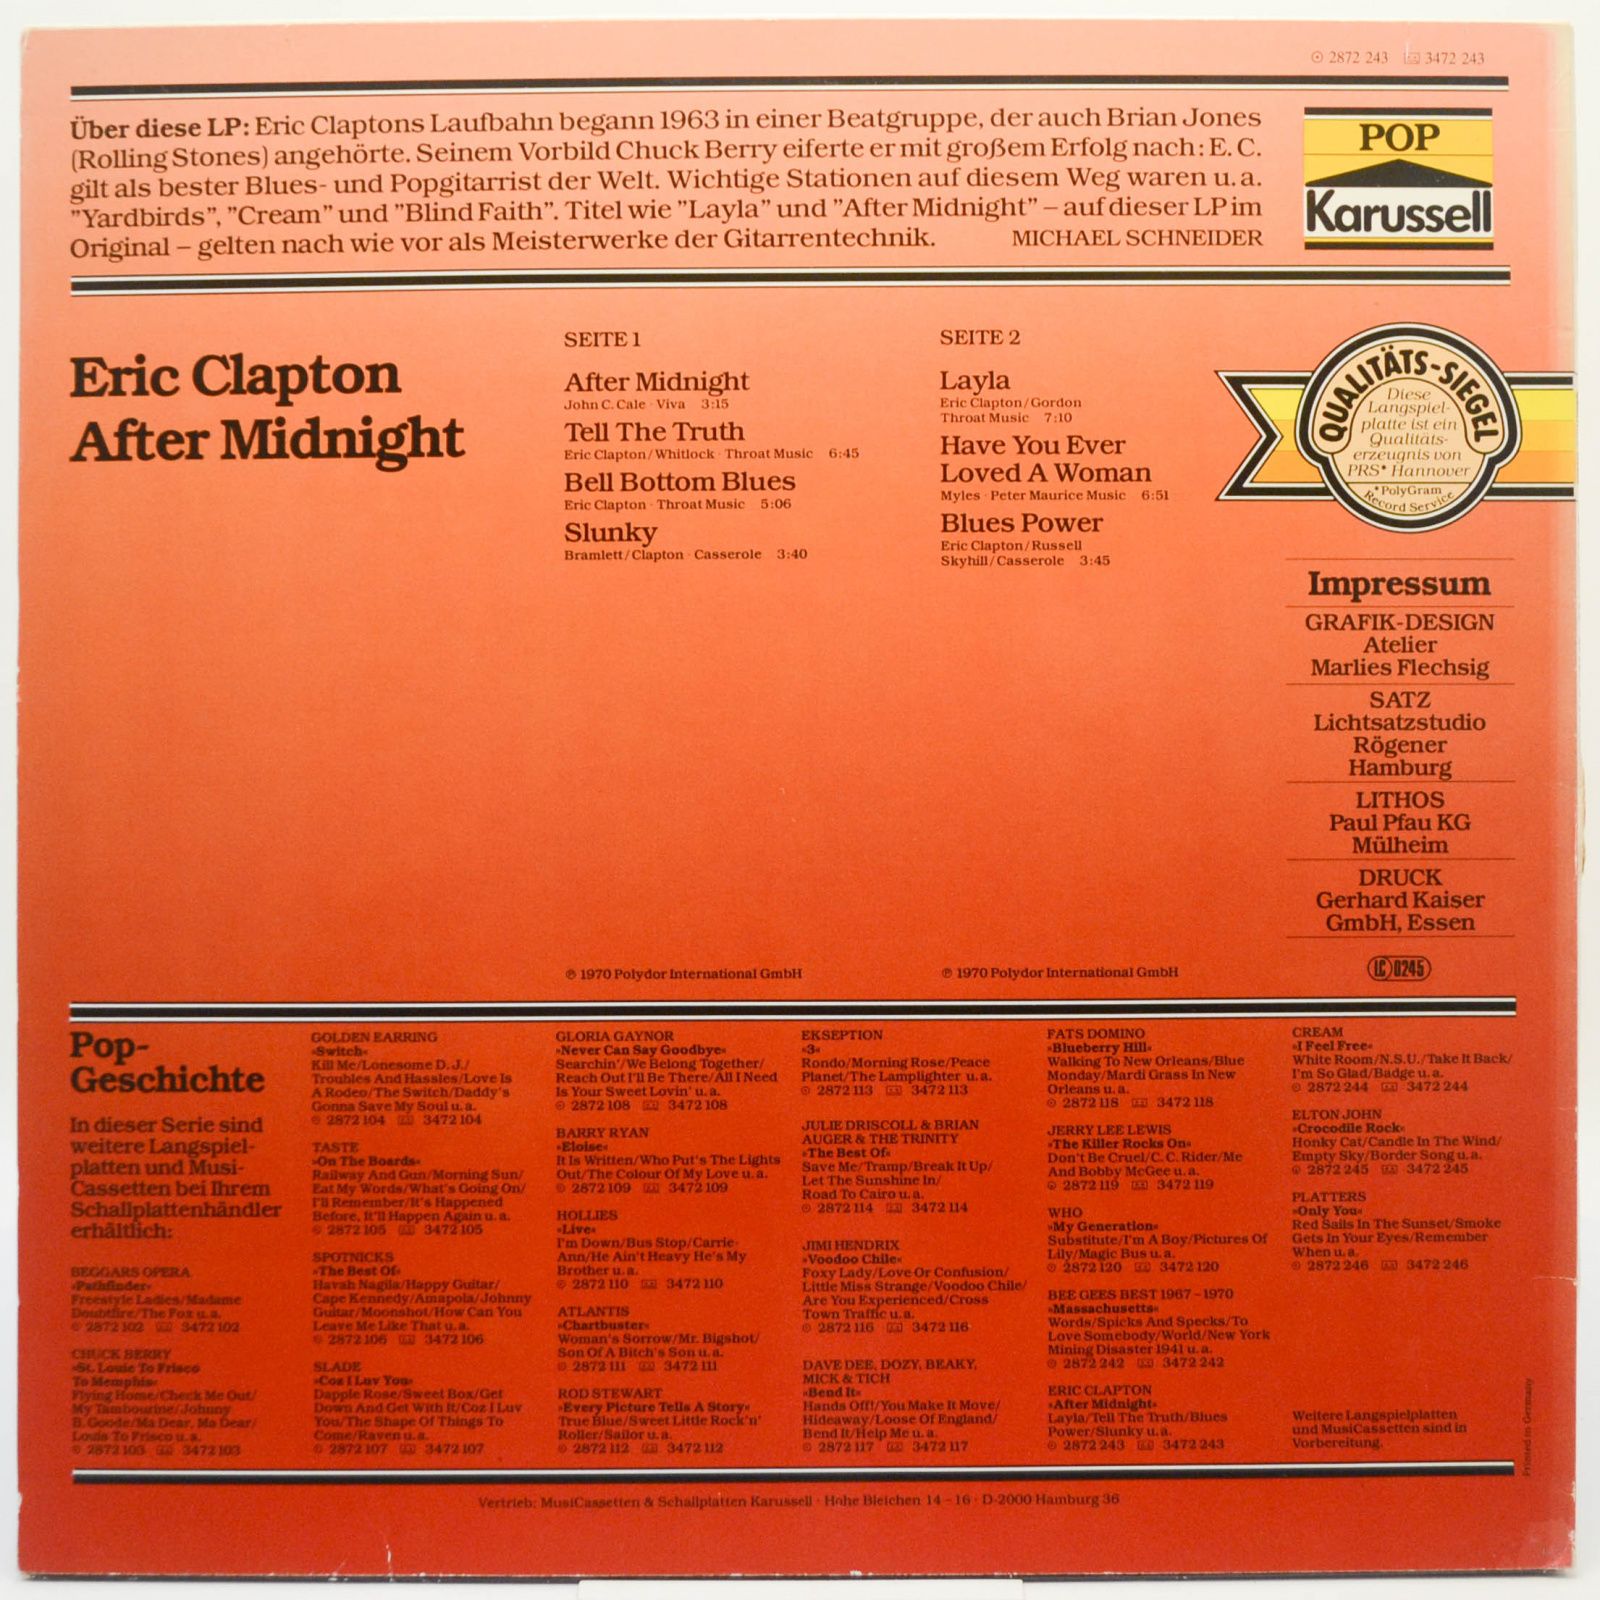 Eric Clapton — After Midnight, 1970